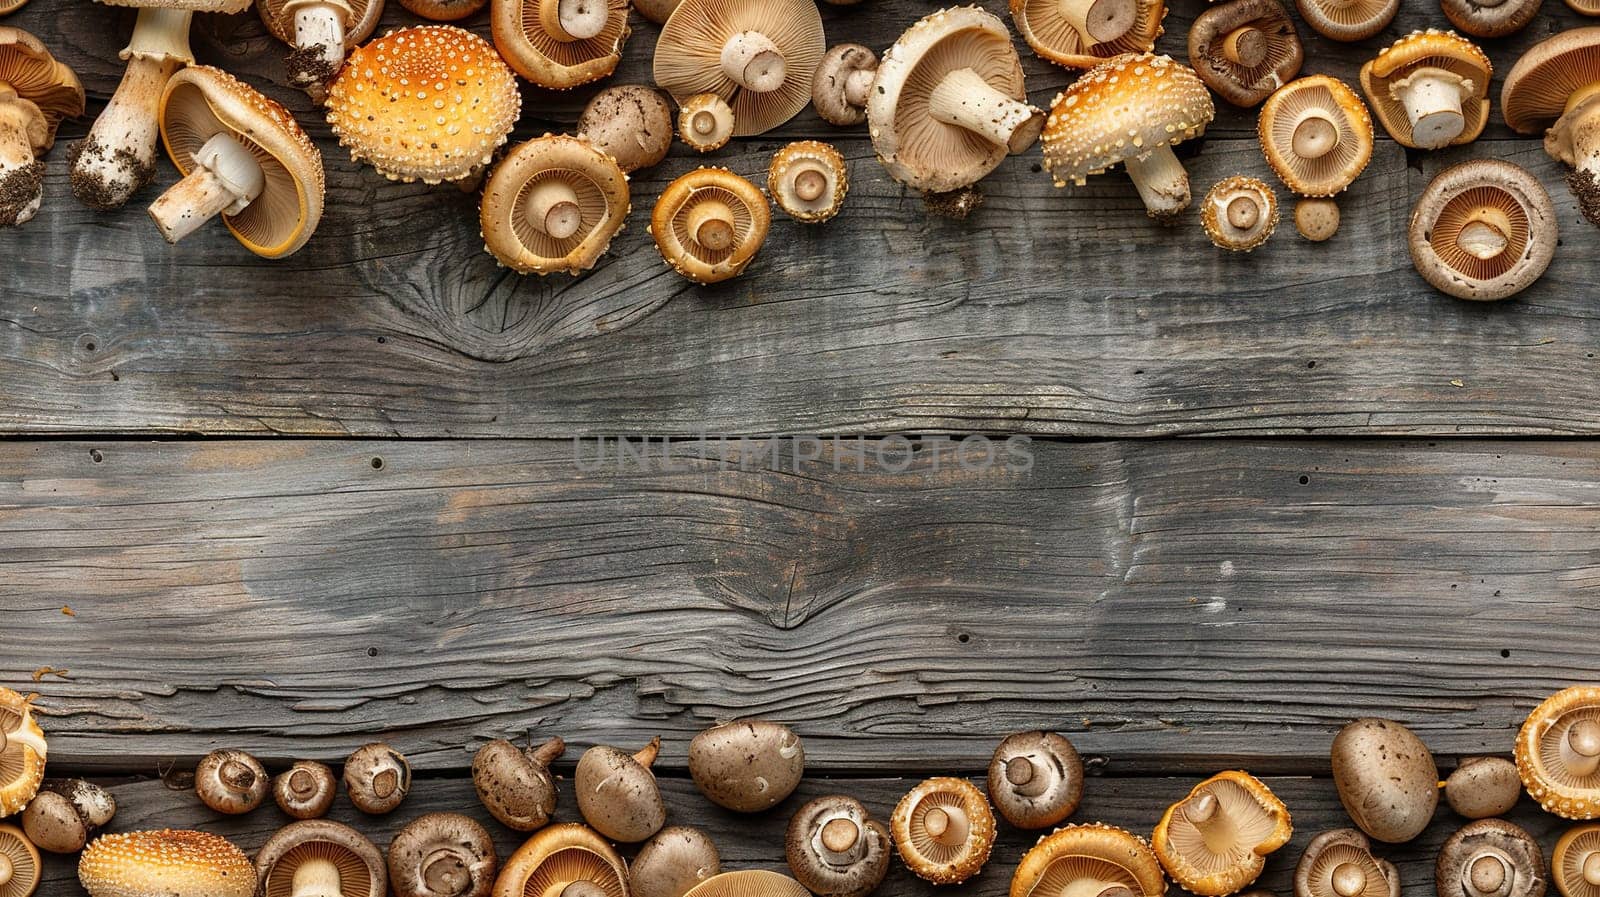 Top view of fresh mushrooms on a wooden surface with space for text.